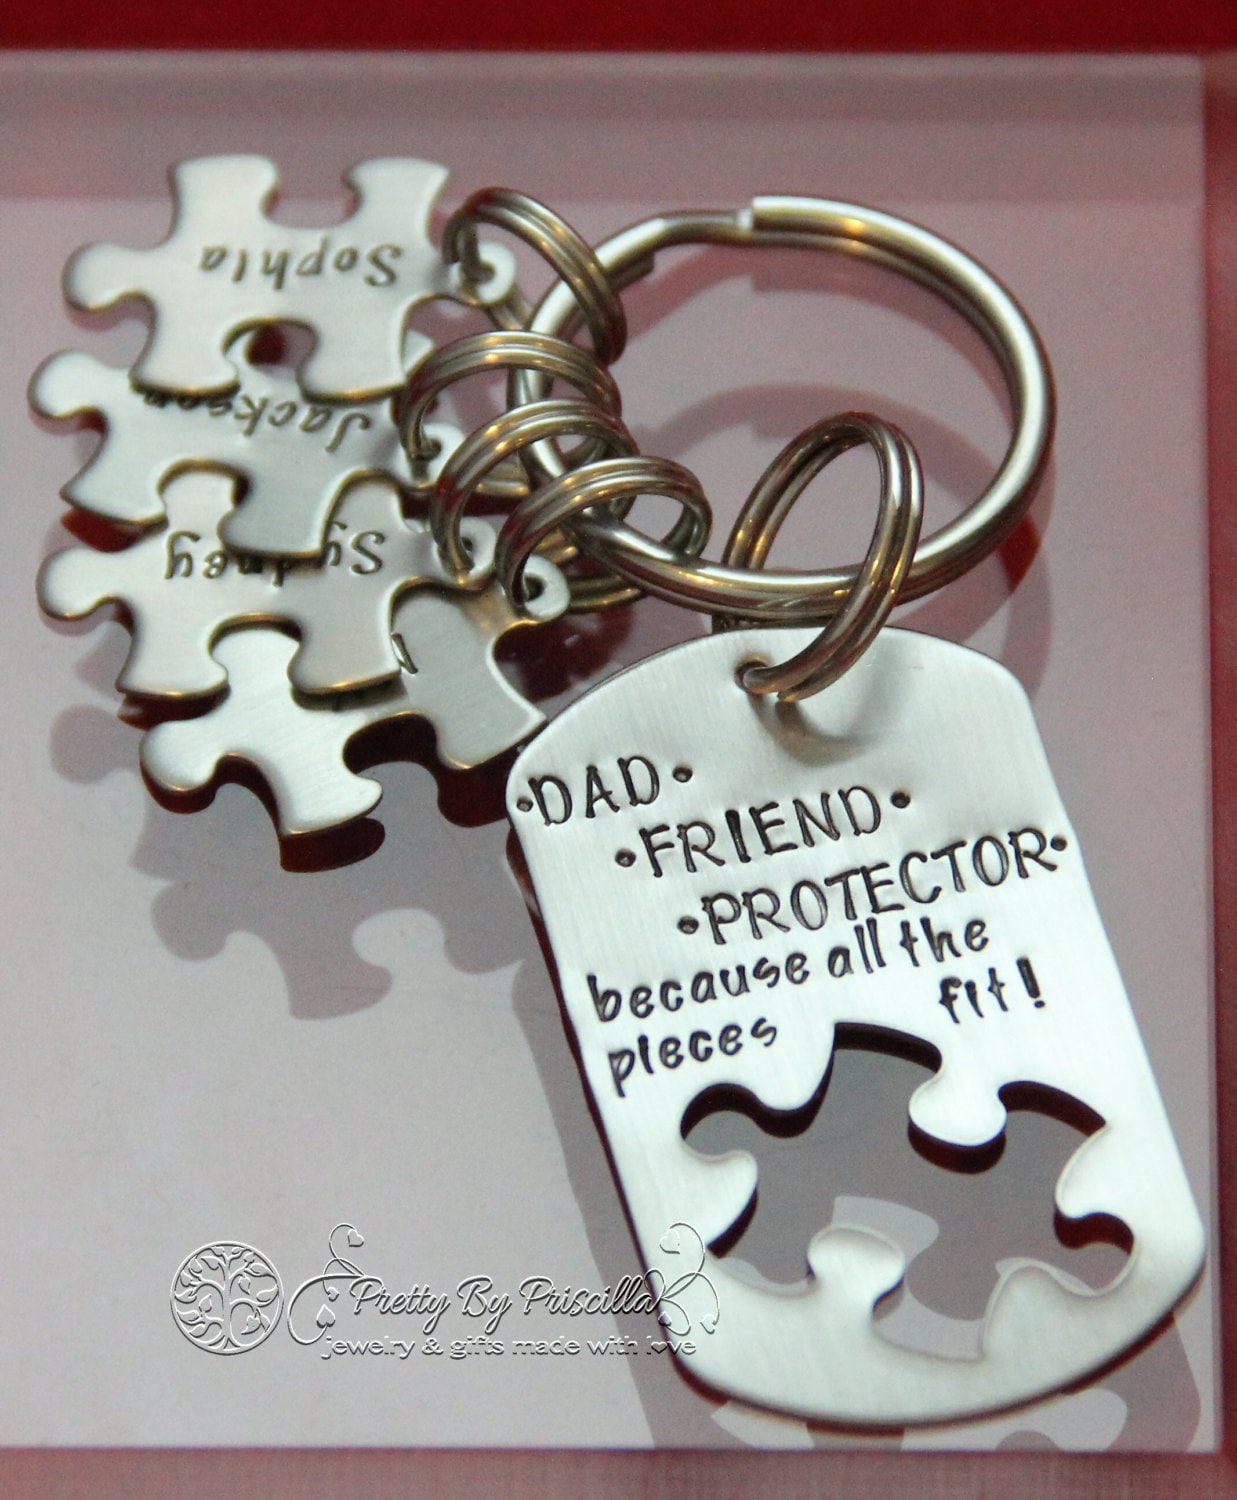 Blended Family Father's Day Gift - Step Dad- Personalized Hand Stamped Stainless Steel Dog Tag Keychain With Mini Puzzle Pieces